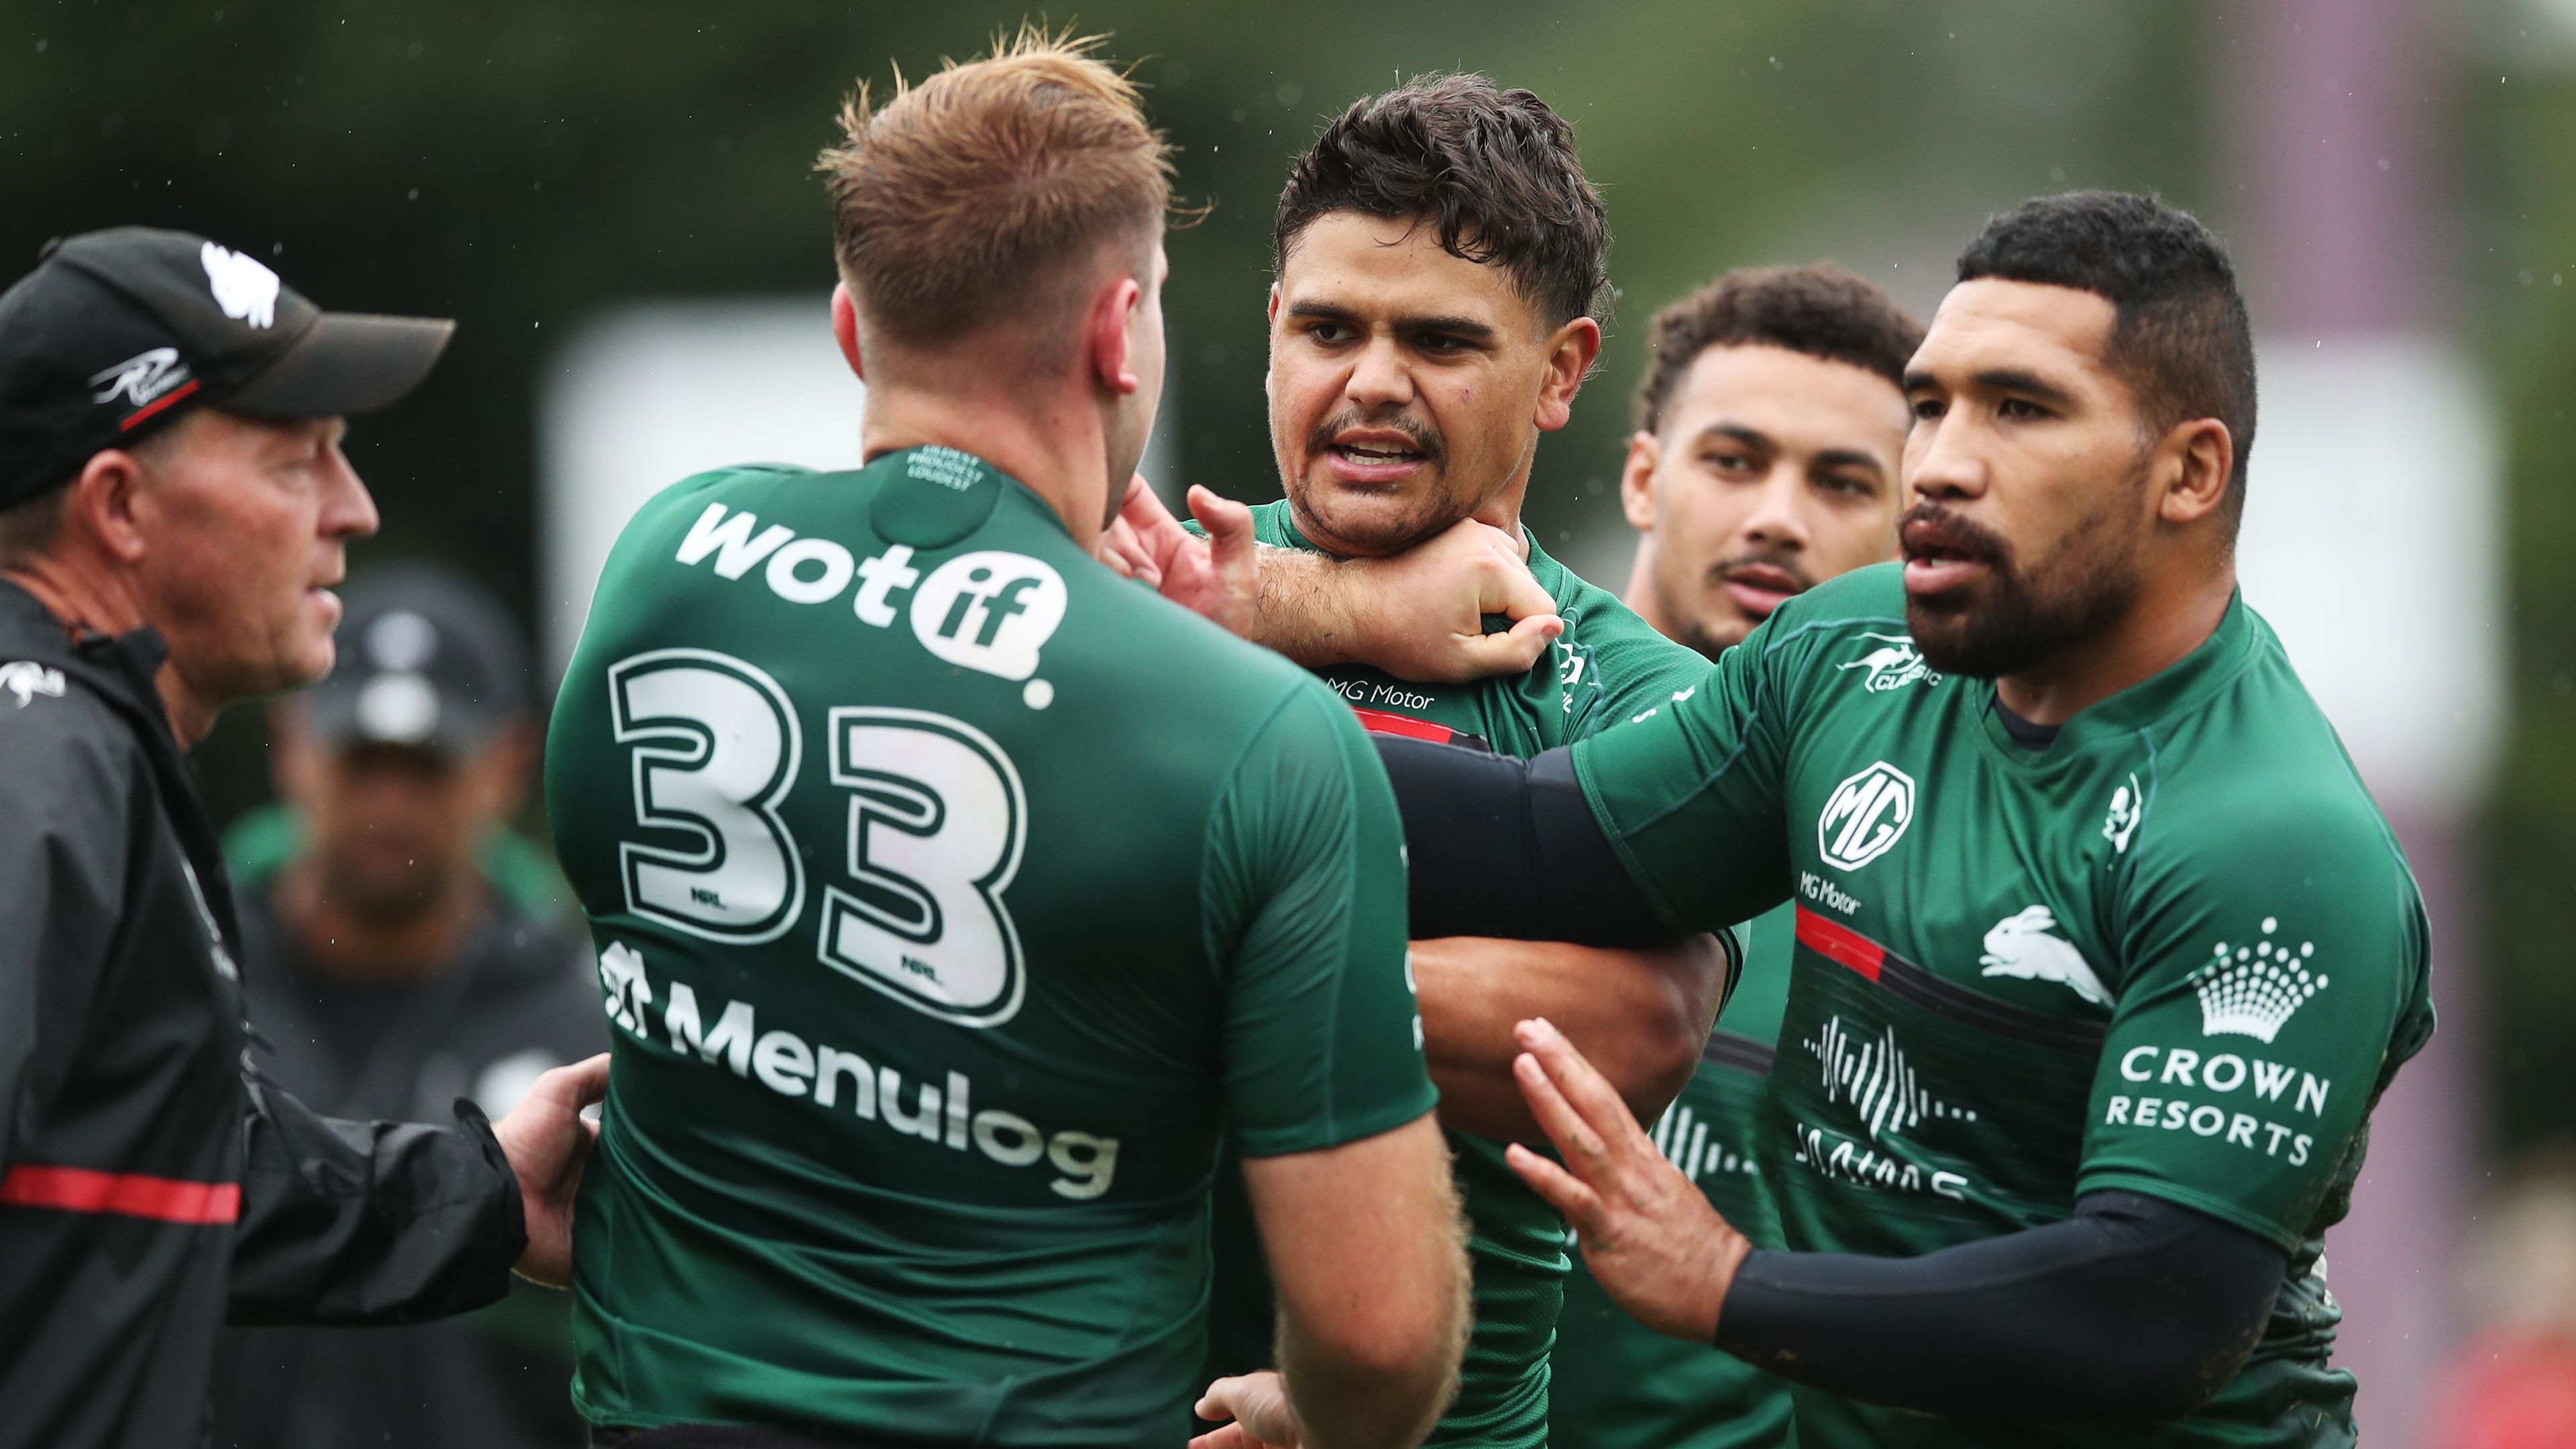 Latrell Mitchell pictured in bust-up with teammate at Rabbitohs training